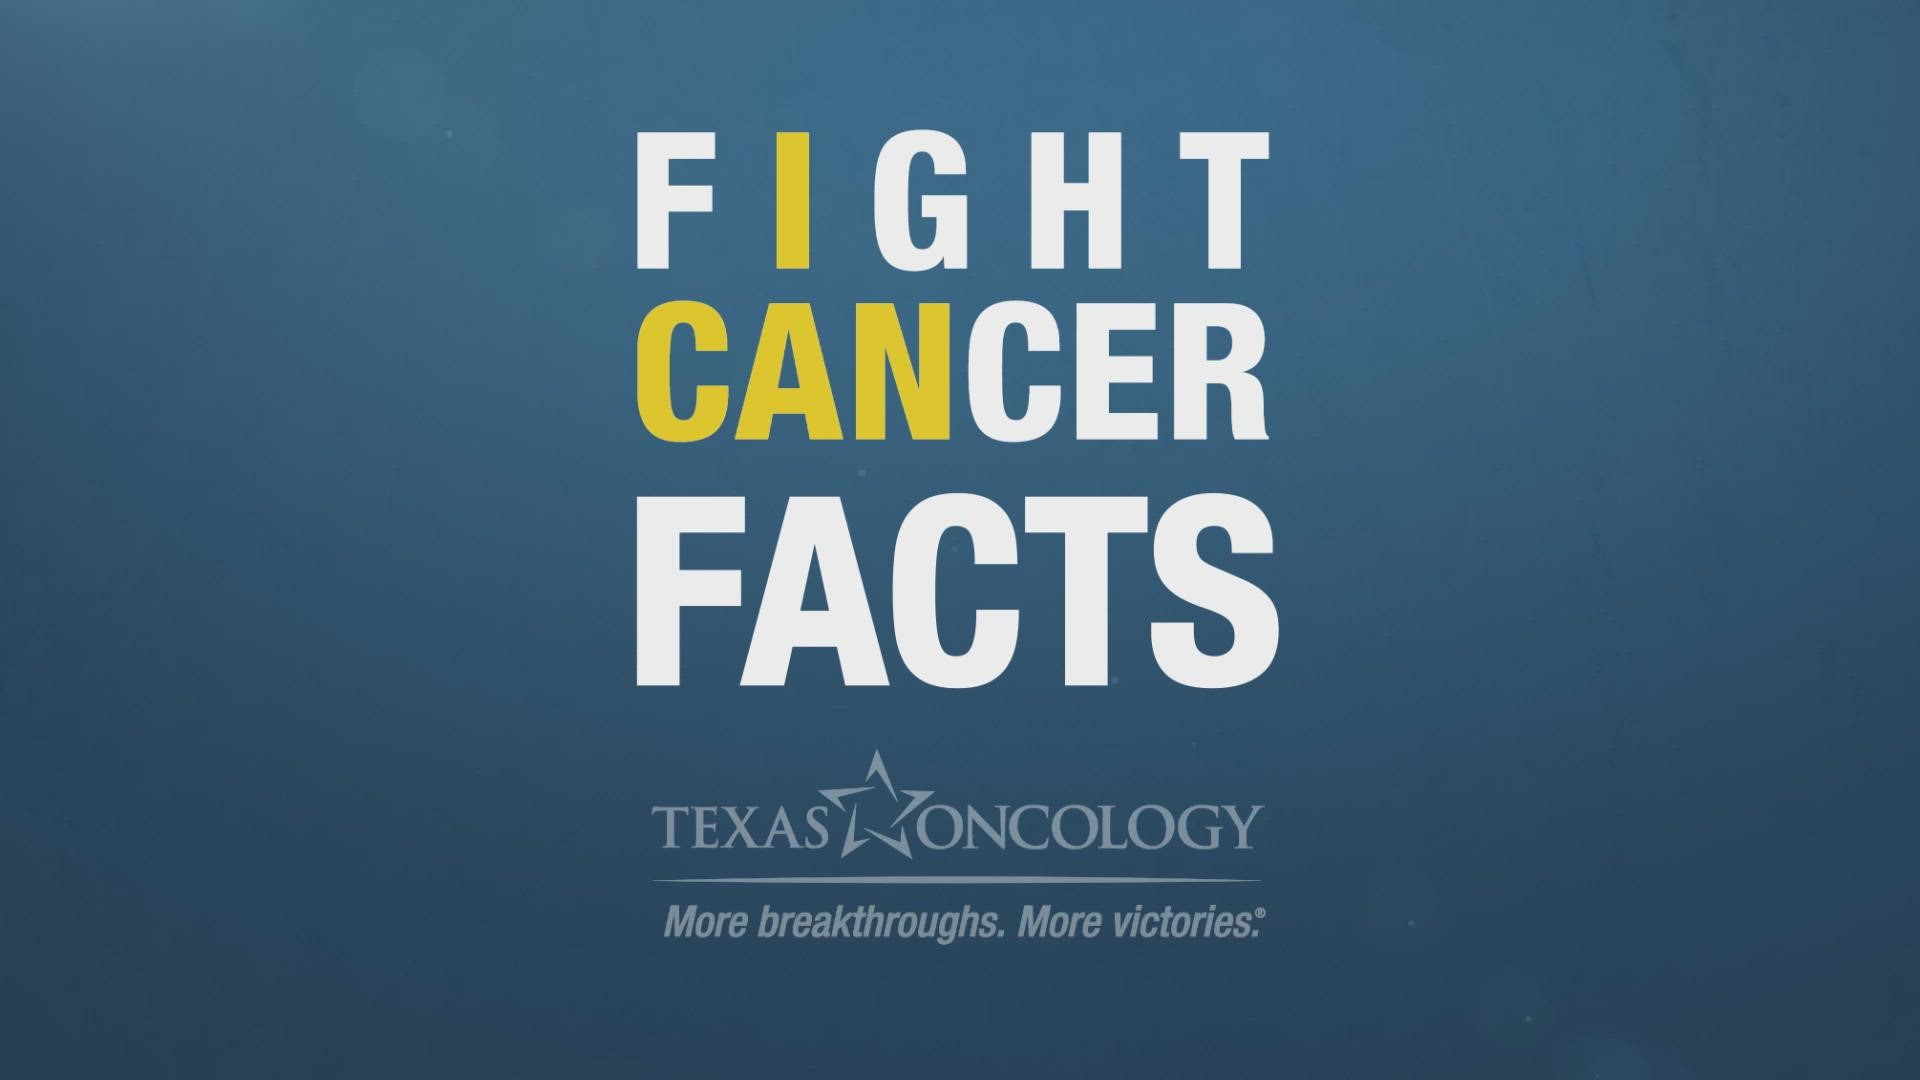 Local Texas Oncology doctor shares how to reduce the risk of lung cancer, which is responsible for the most cancer-related deaths in men and women.